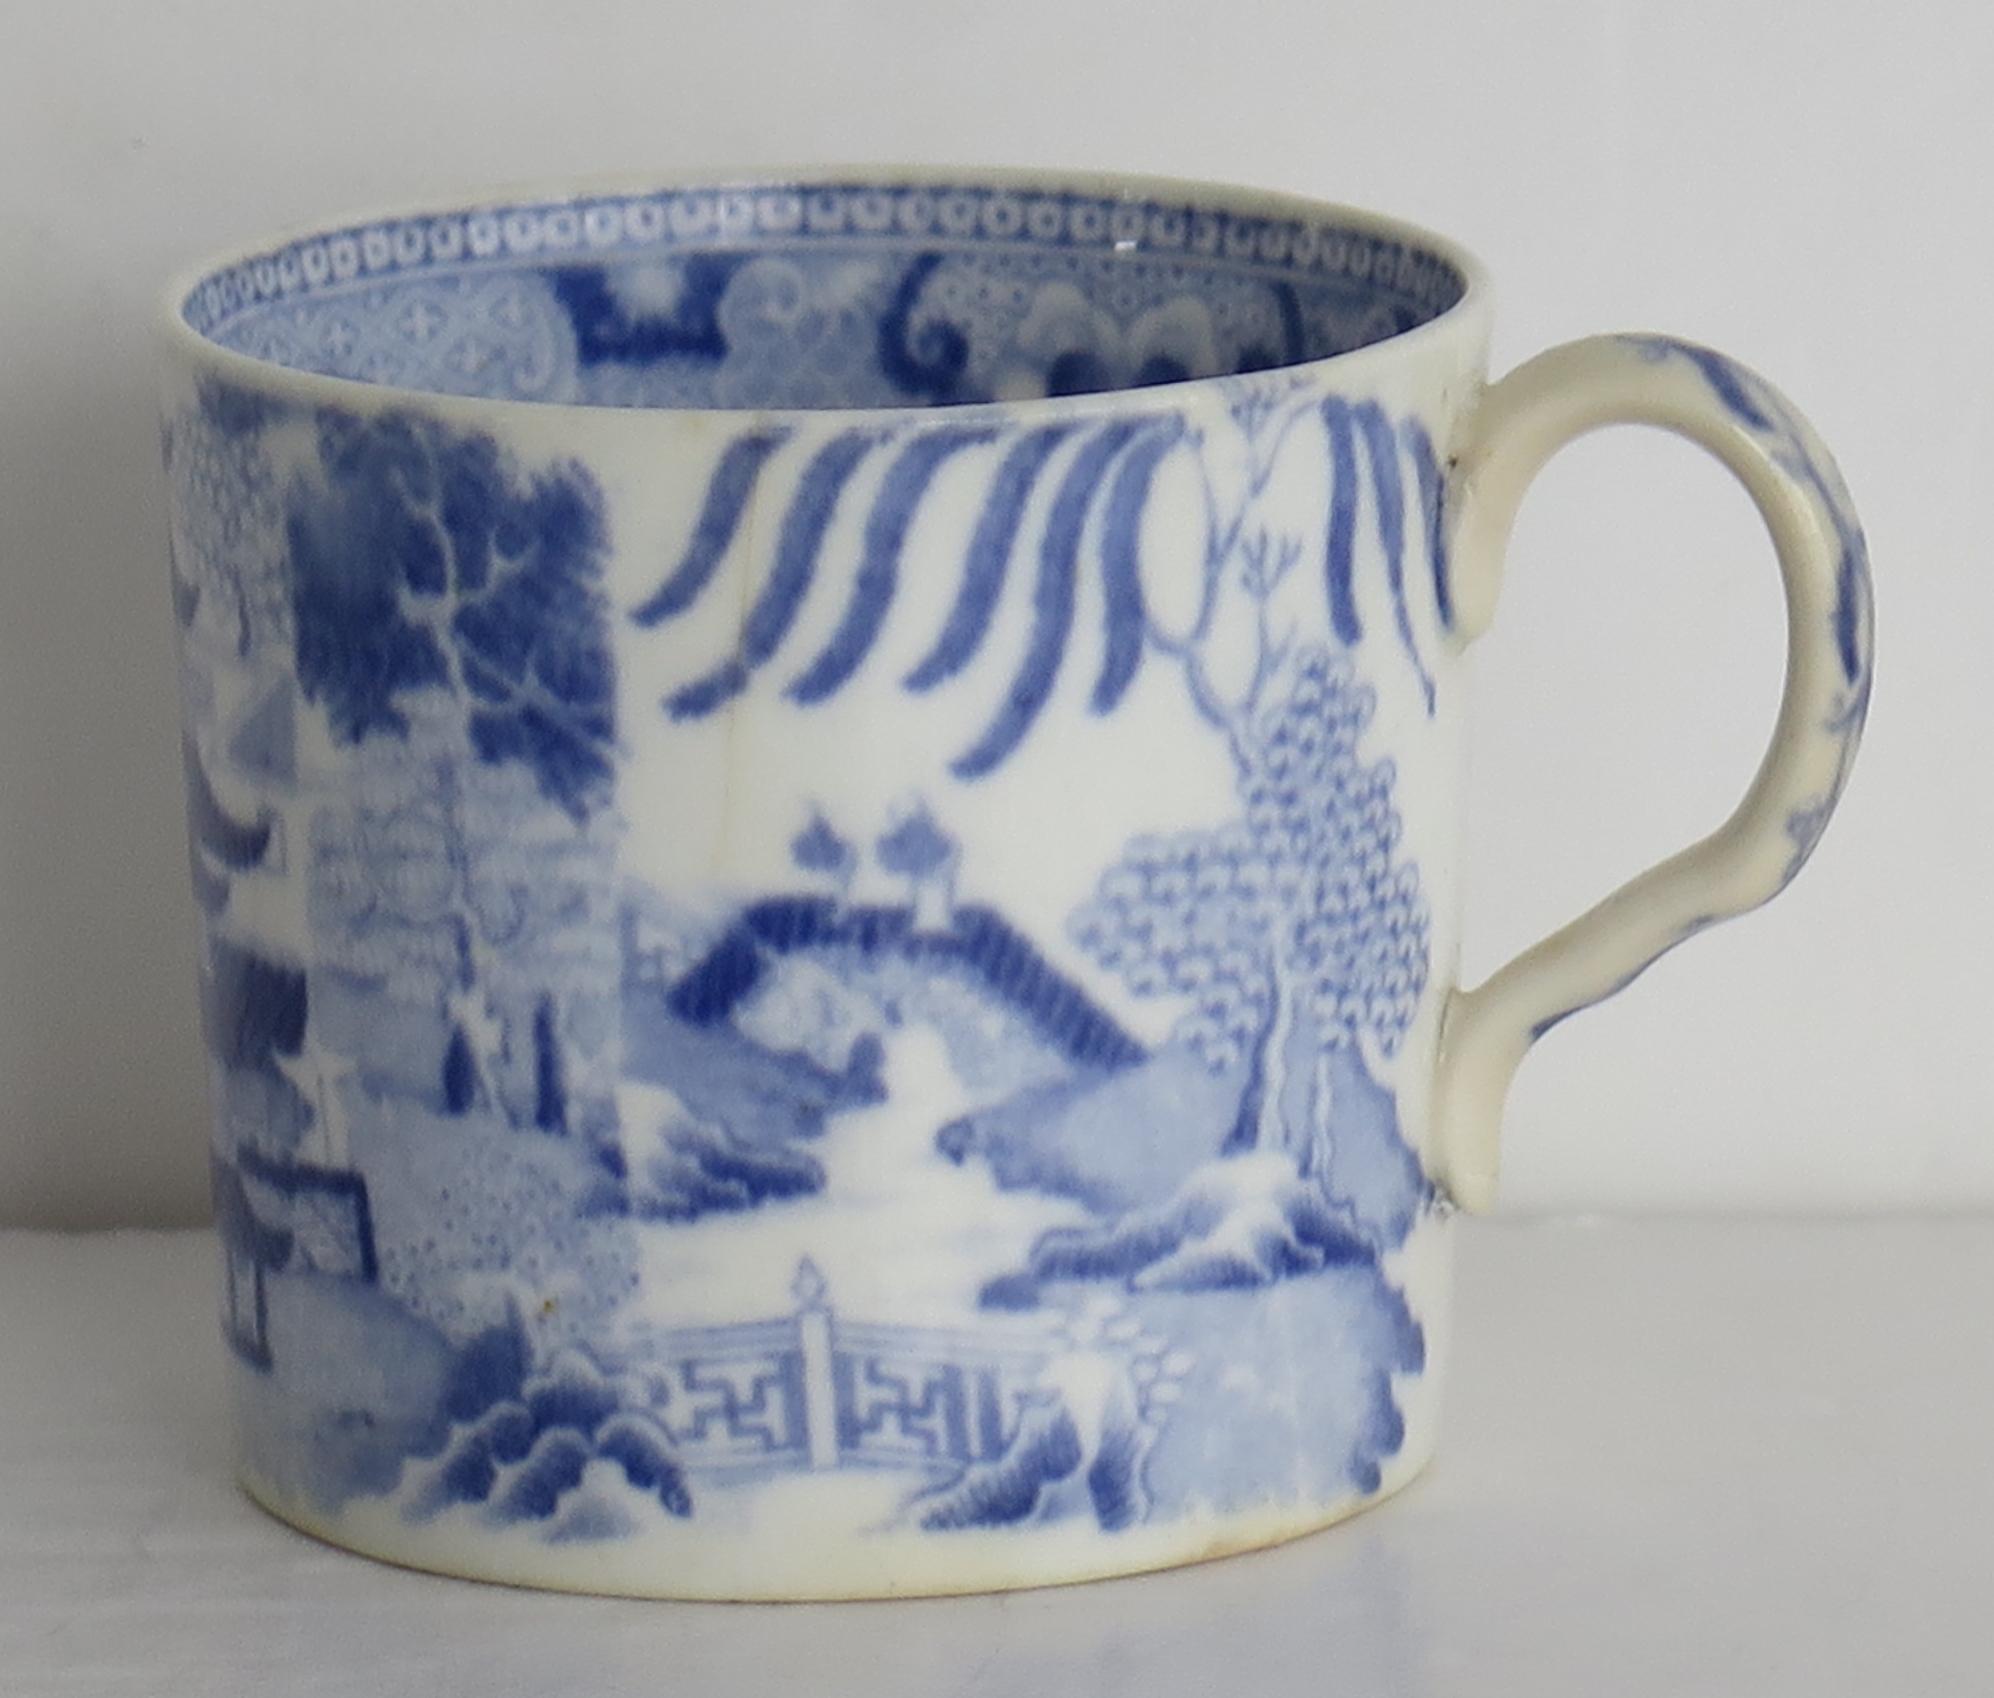 This is a good porcelain coffee can from the factory of S & J Rathbone, with a transfer printed Blue & White Broseley pattern, made very early in the 19th century, George 111 period, circa 1805.

The coffee can has the distinctive loop handle with